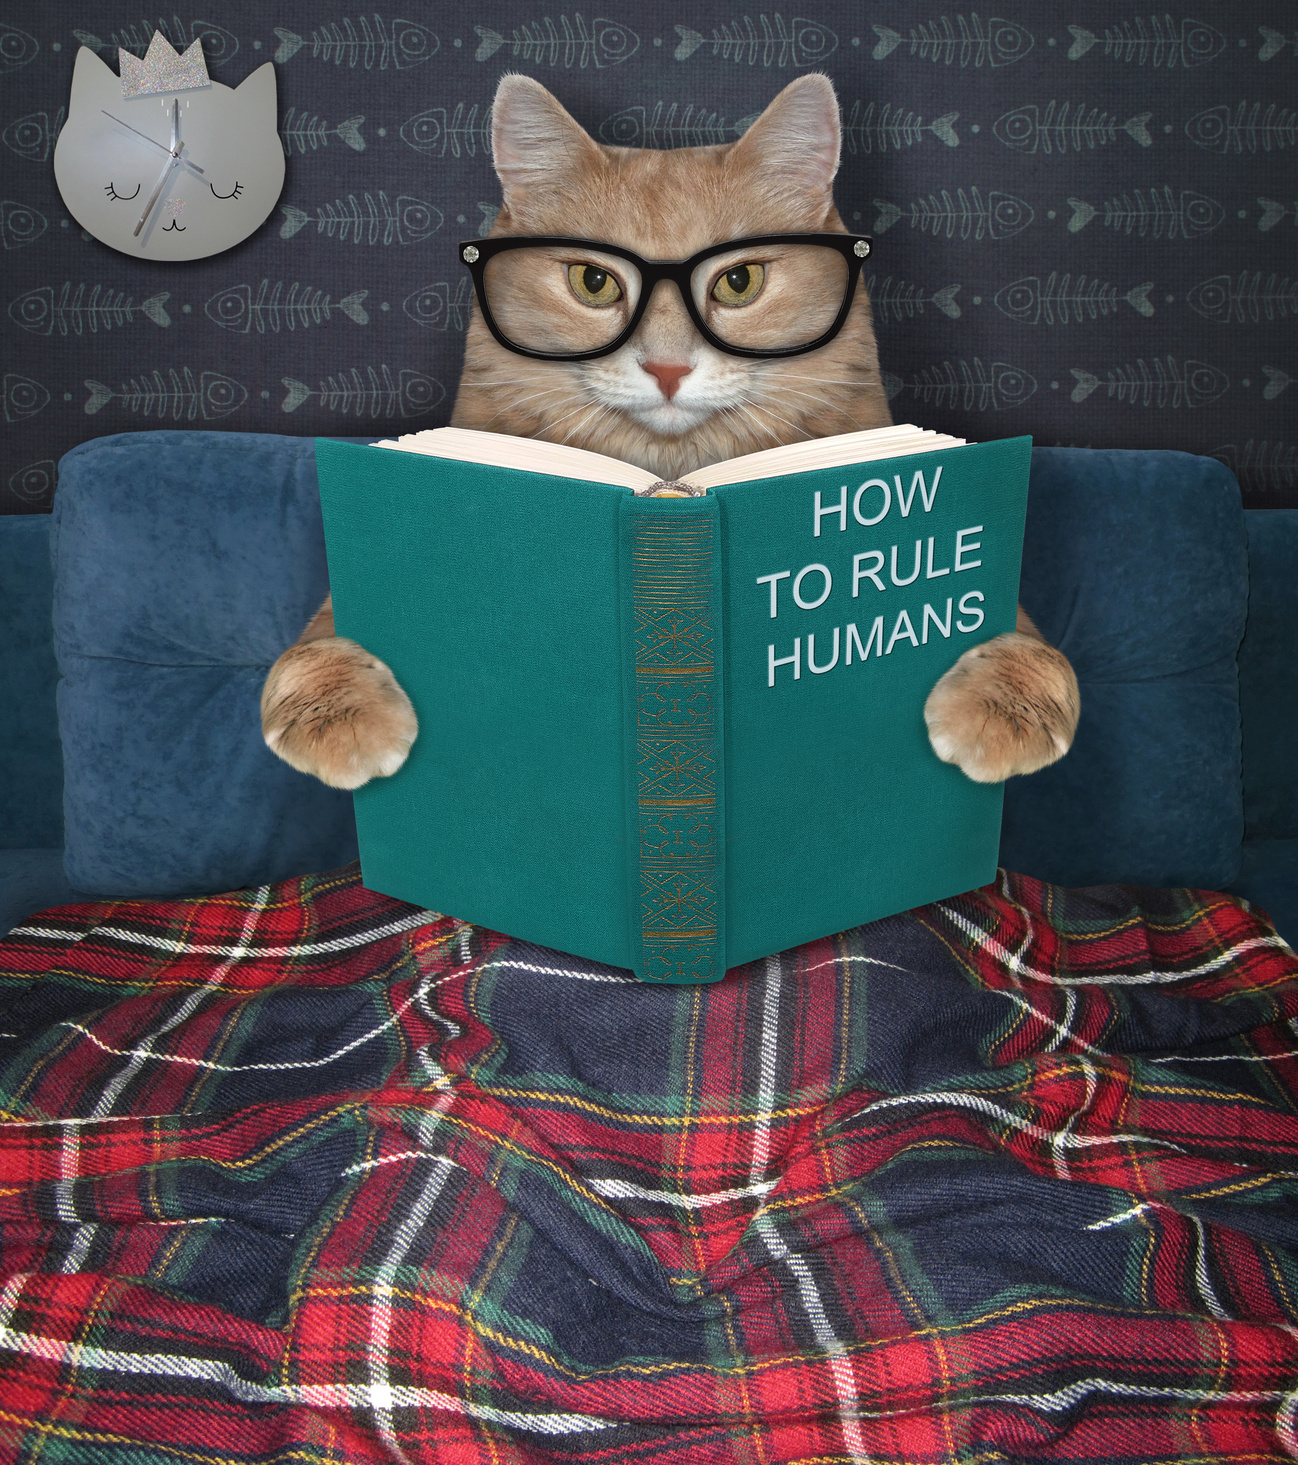 Cat reading funny book in bed